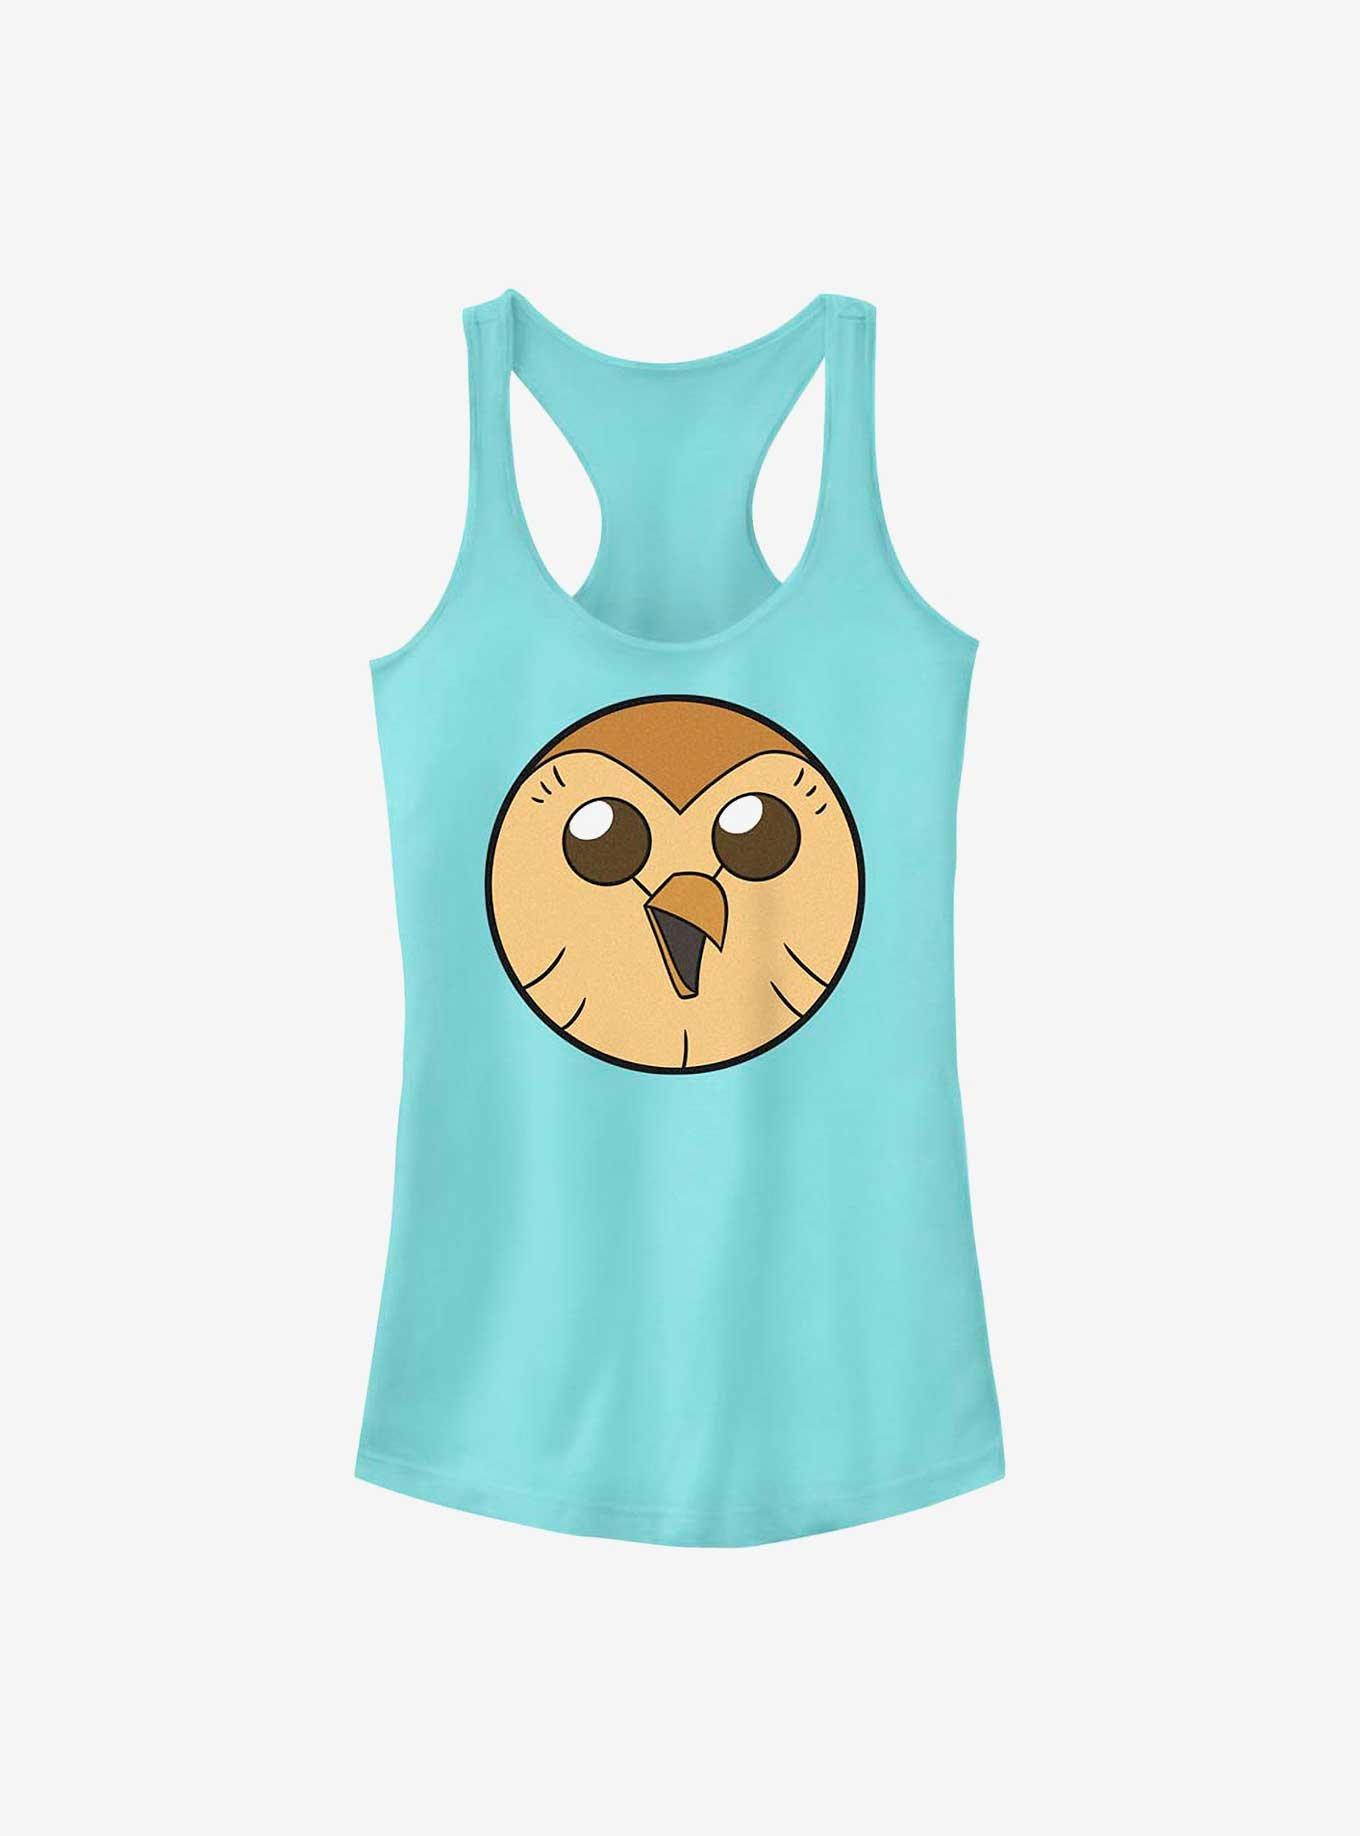 Disney The Owl House Solid Hooty Face Girls Tank, CANCUN, hi-res